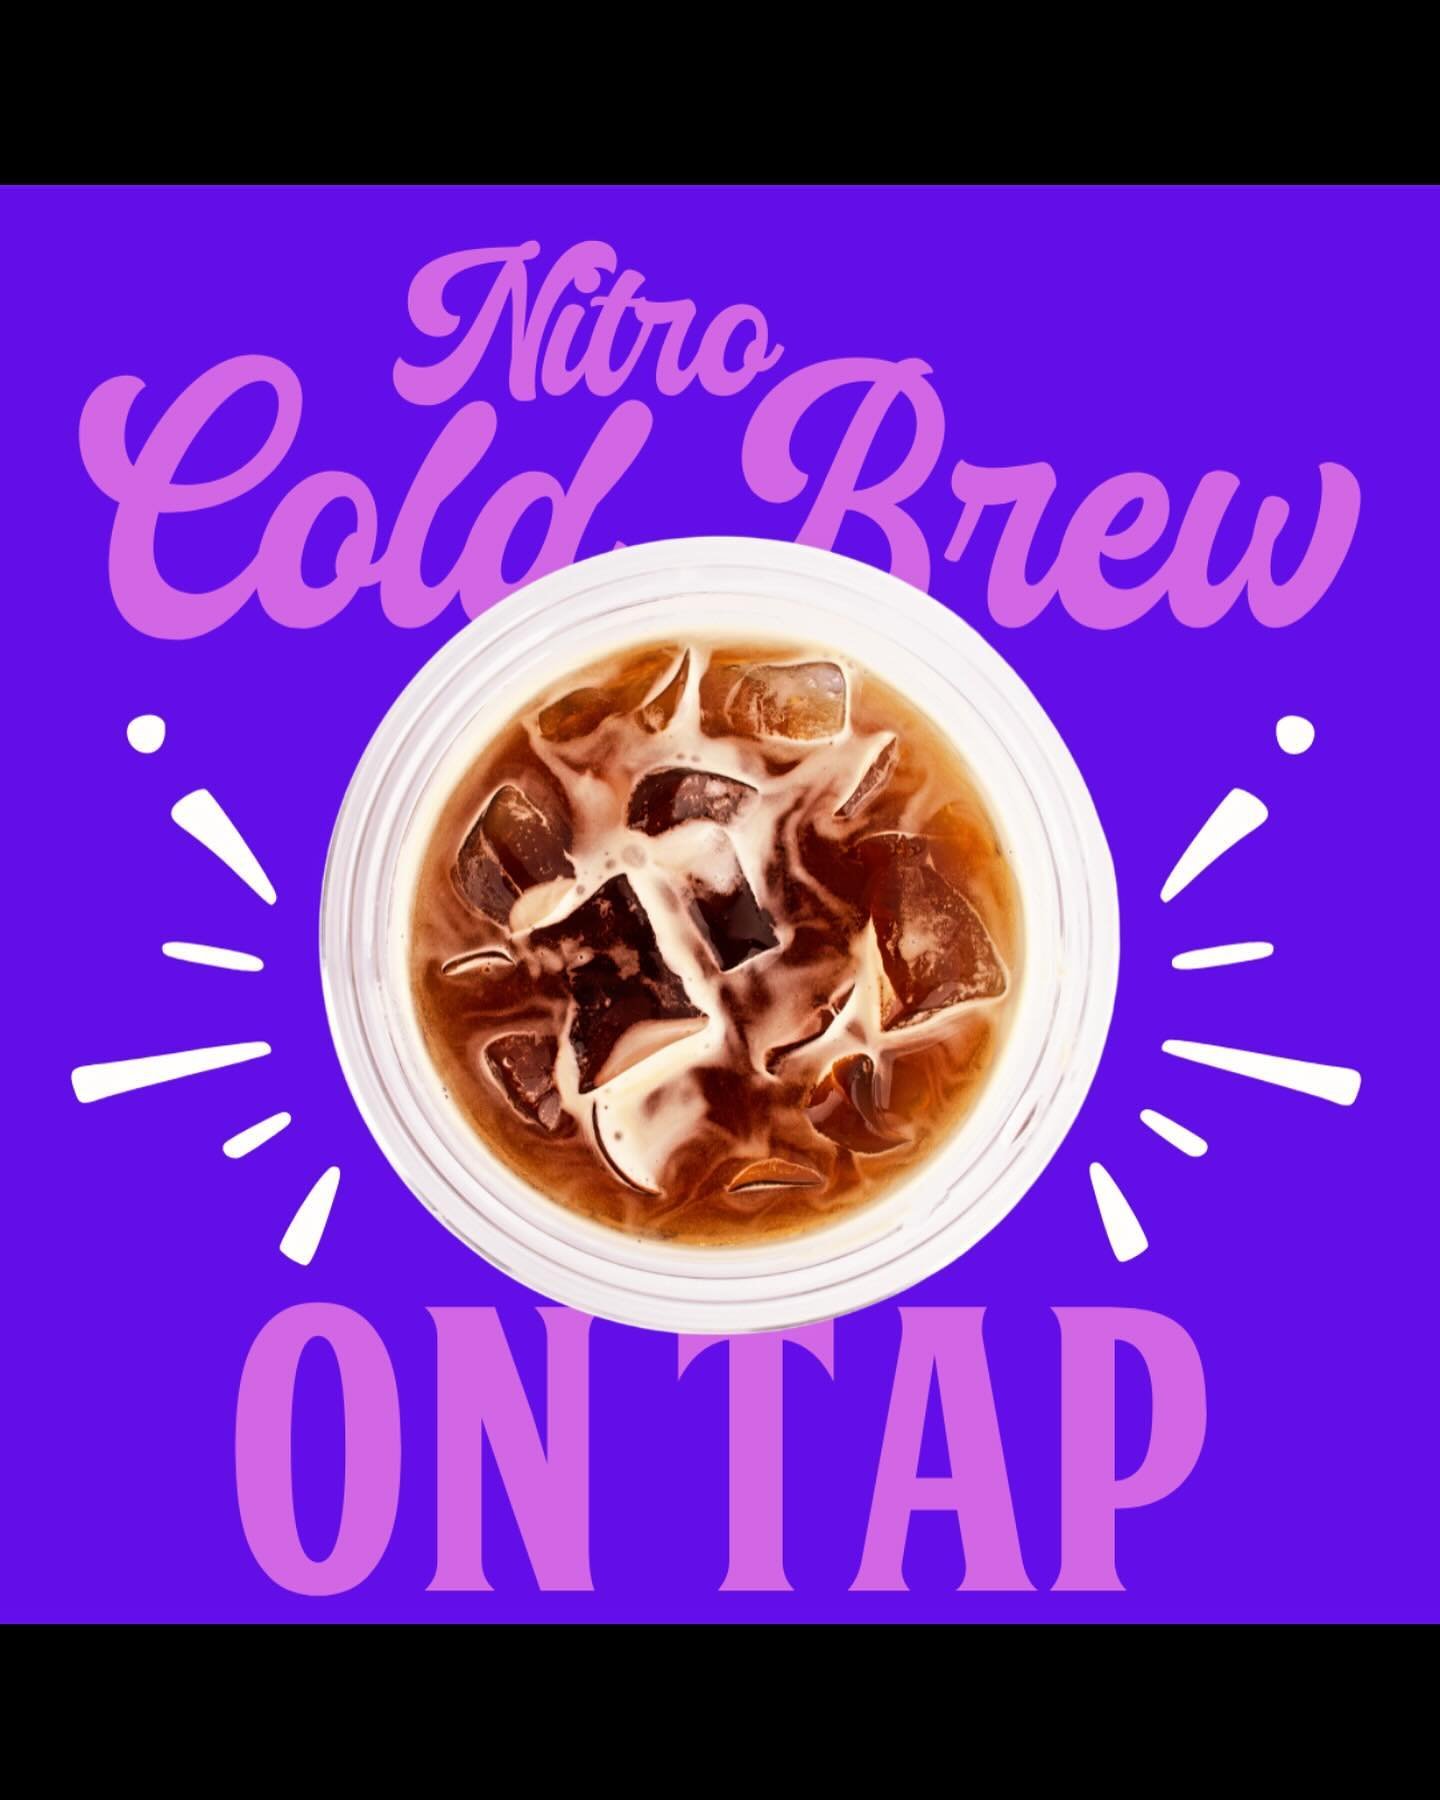 Serving @beanstockcoffee  since day one, their nitro cold brew on tap is a crowd favorite. The nitrogen infusion gives this 20+ hour steep a delicious frothy &amp; velvety texture, that&rsquo;s almost too smooth for your  daily caffeine intake 😳☕️